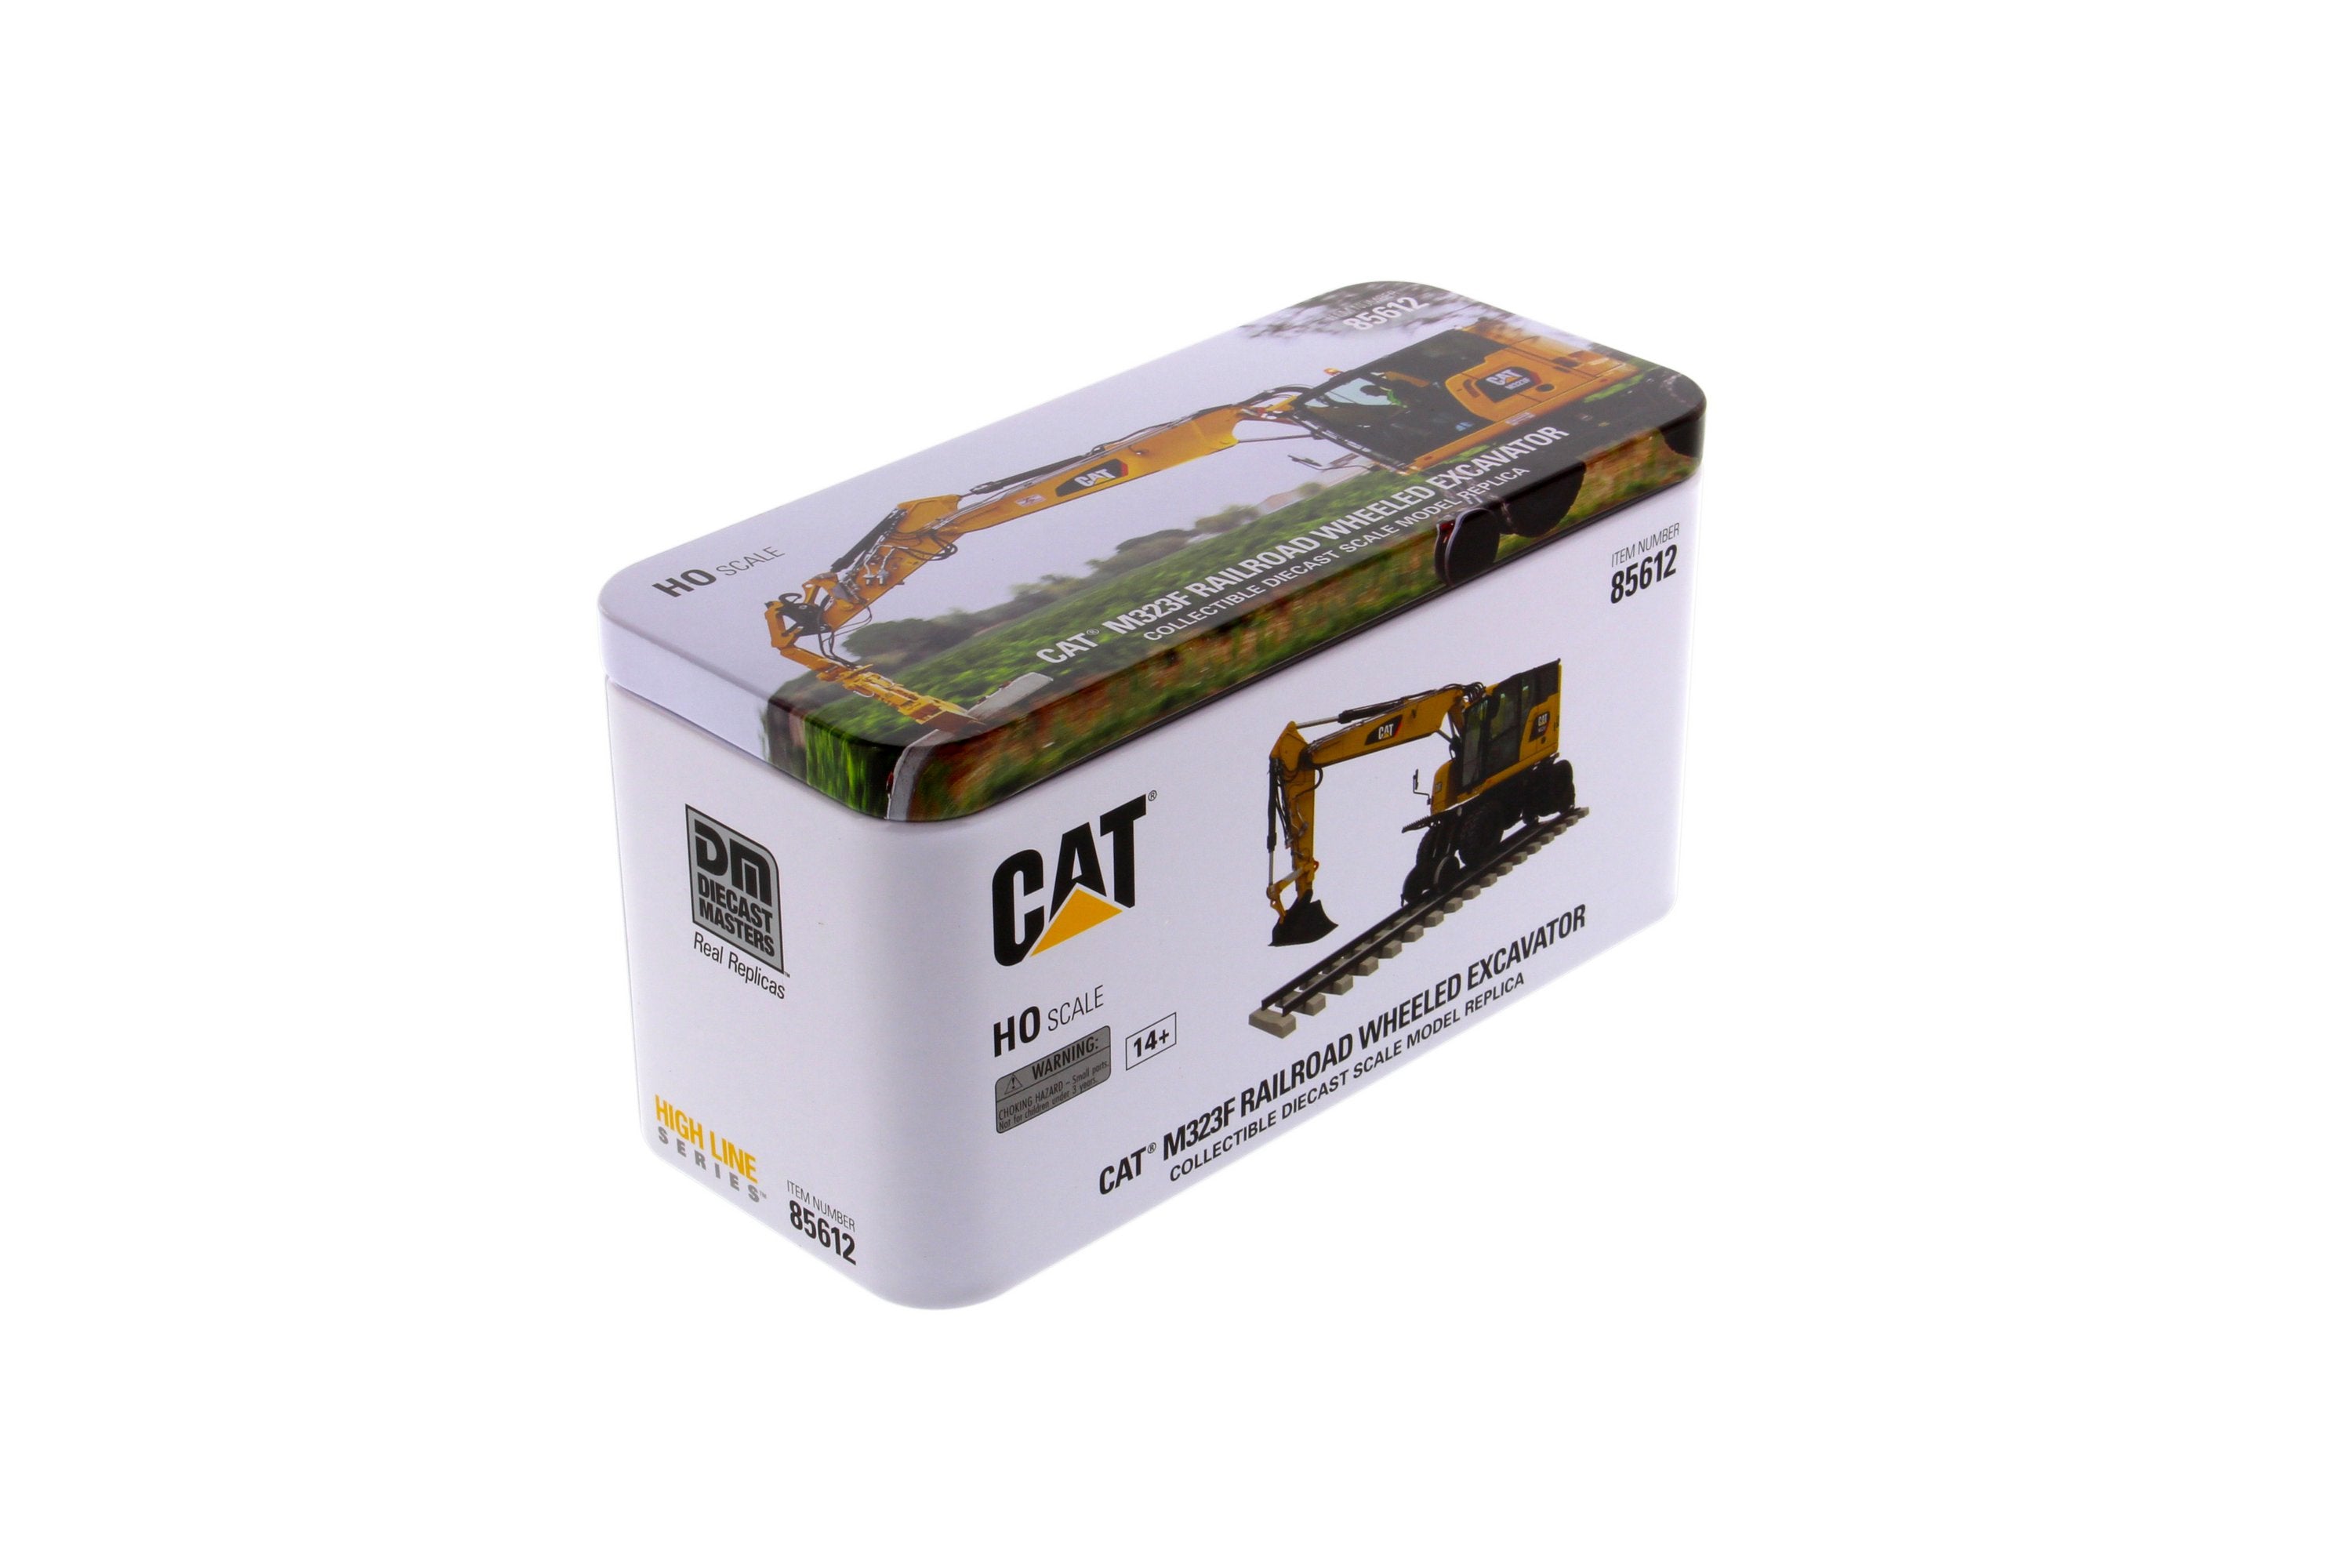 CAT Die Cast M323F Railroad Wheeled Excavator Safety Yellow Colour 1:87